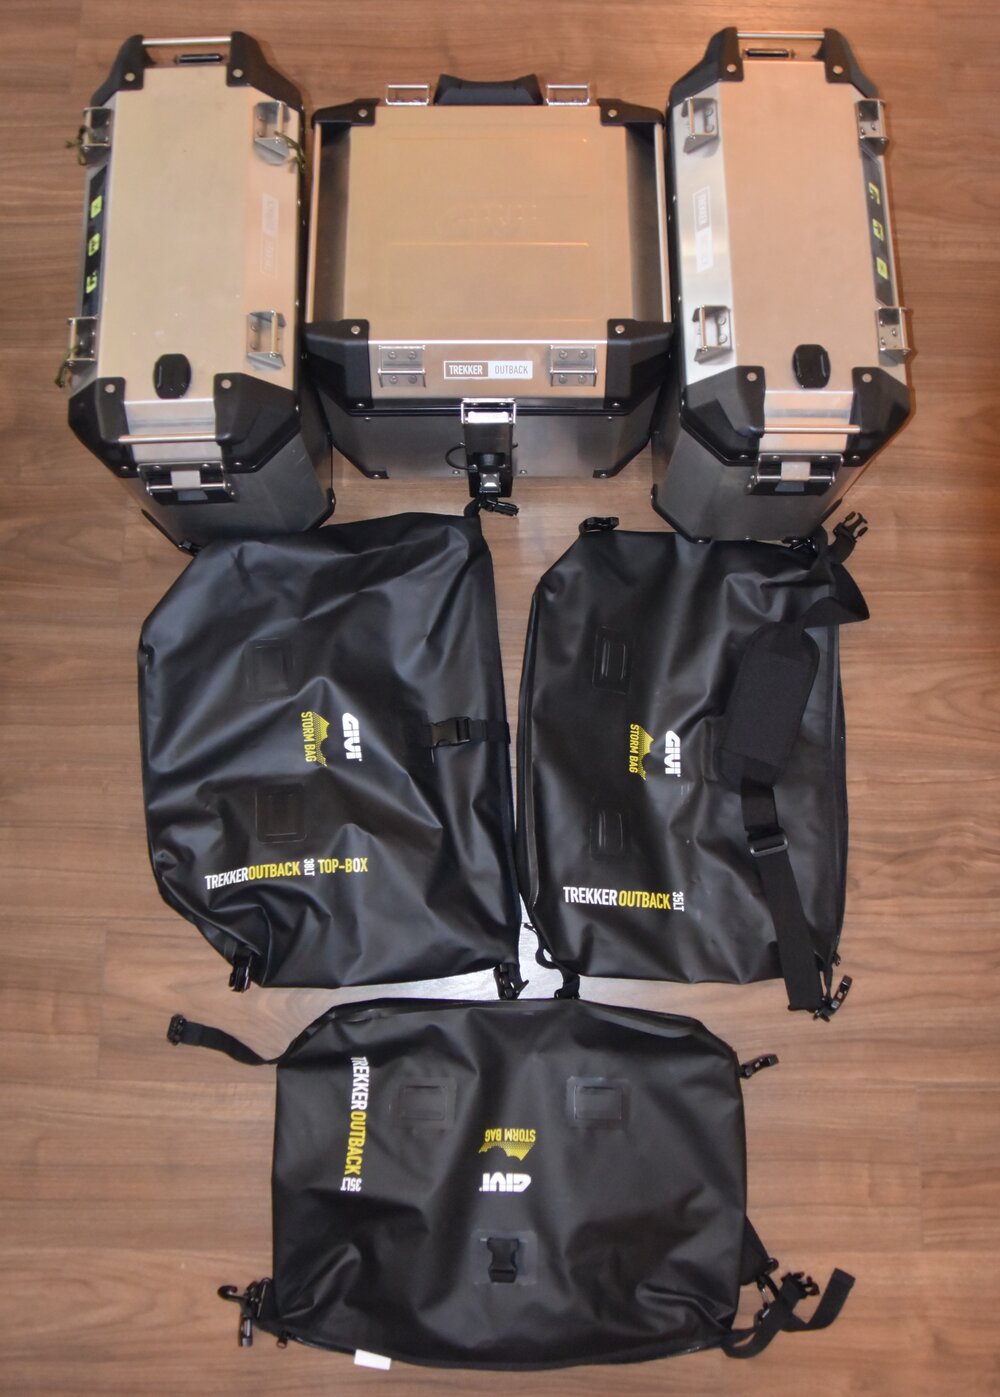 Givi Trekker Outback panniers, top box and inner bags